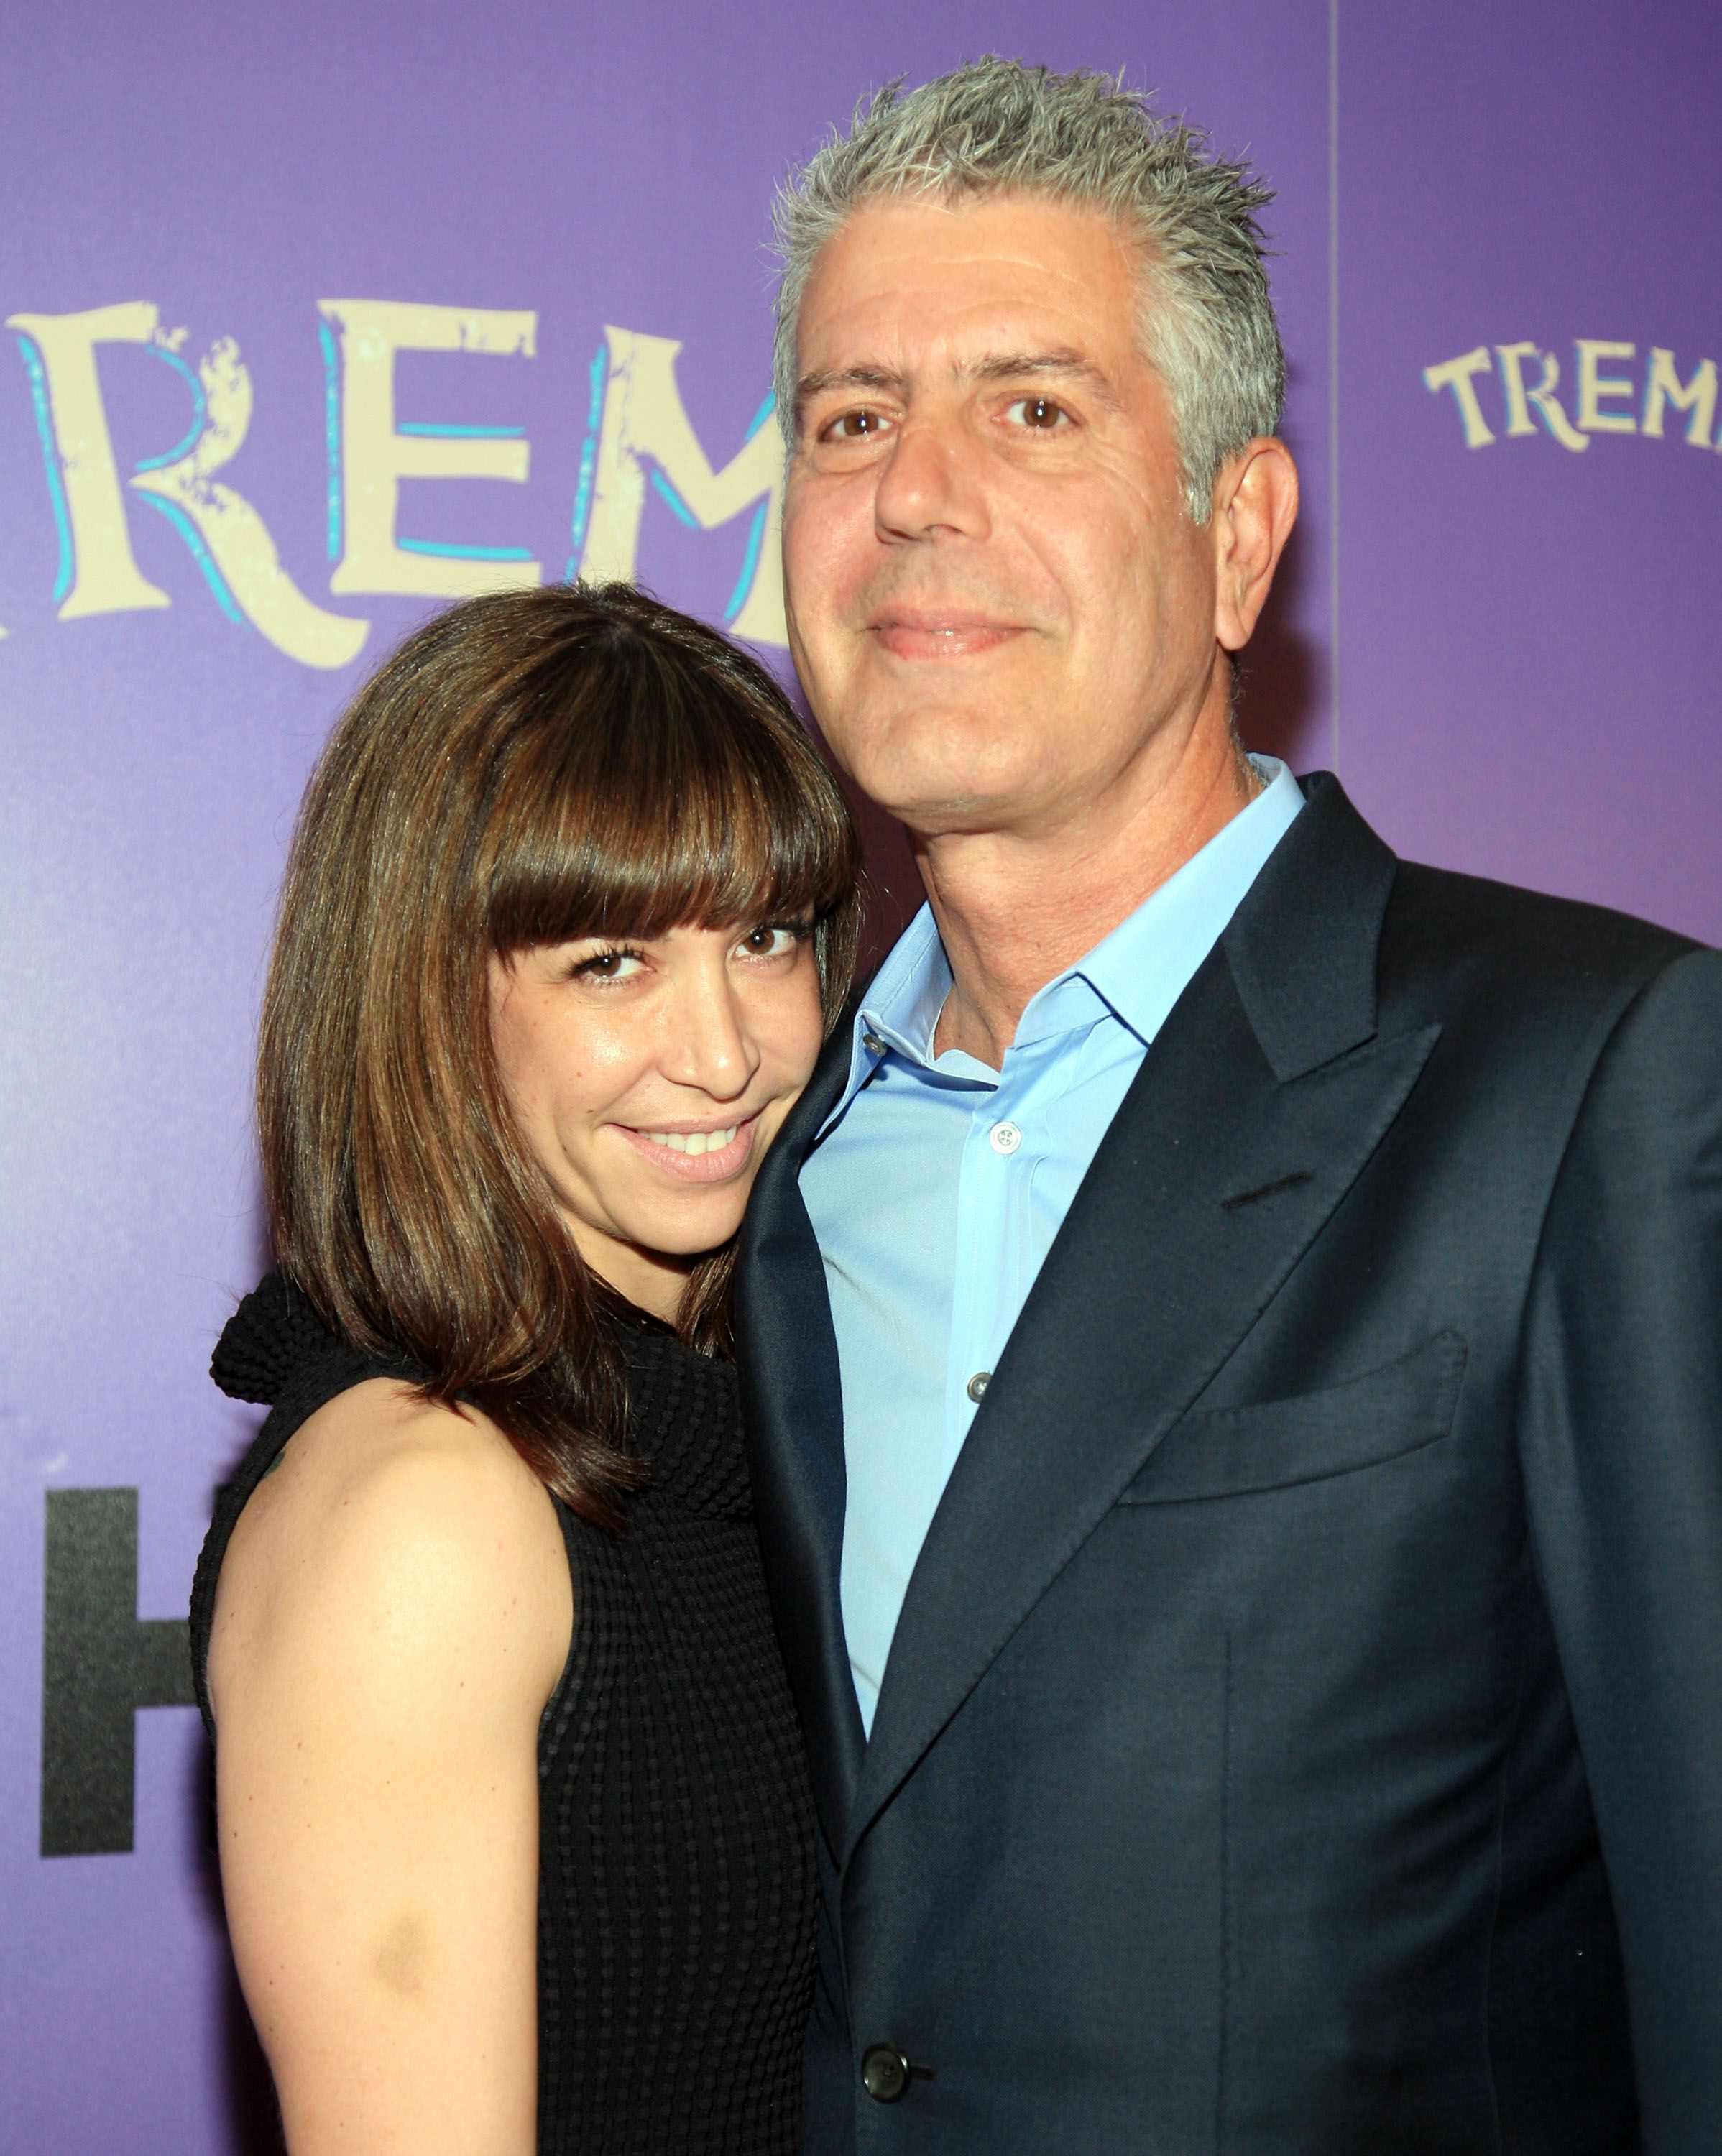 Restaurant Business Brought Together Anthony Bourdain And Ex Wife Ottavia Busia